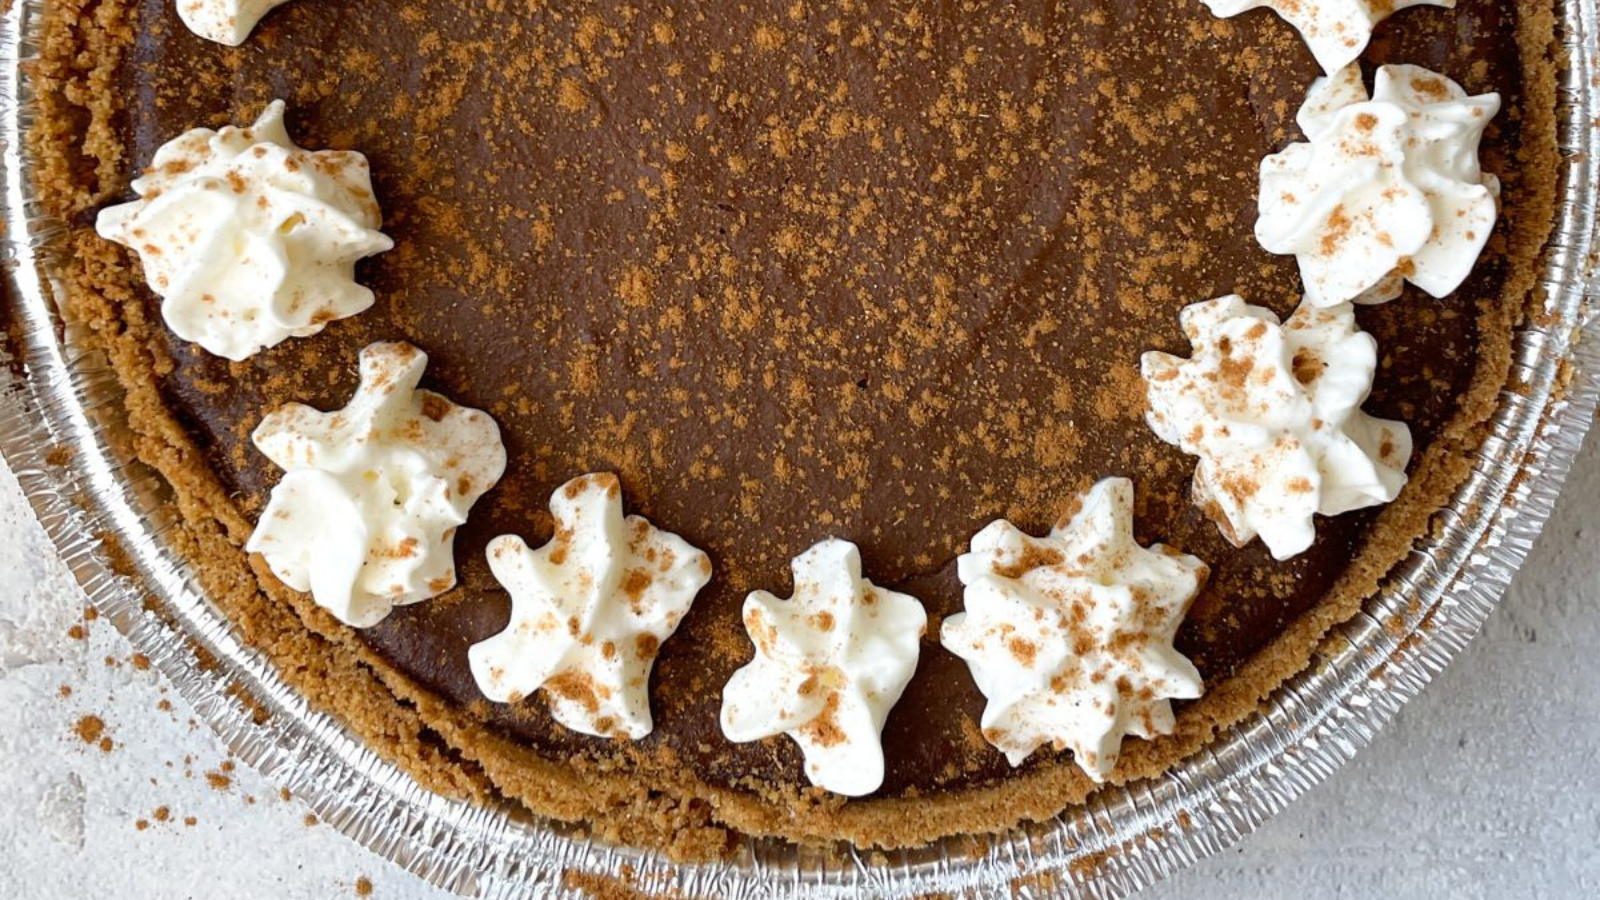 A chocolate pumpkin pie with whipped cream.